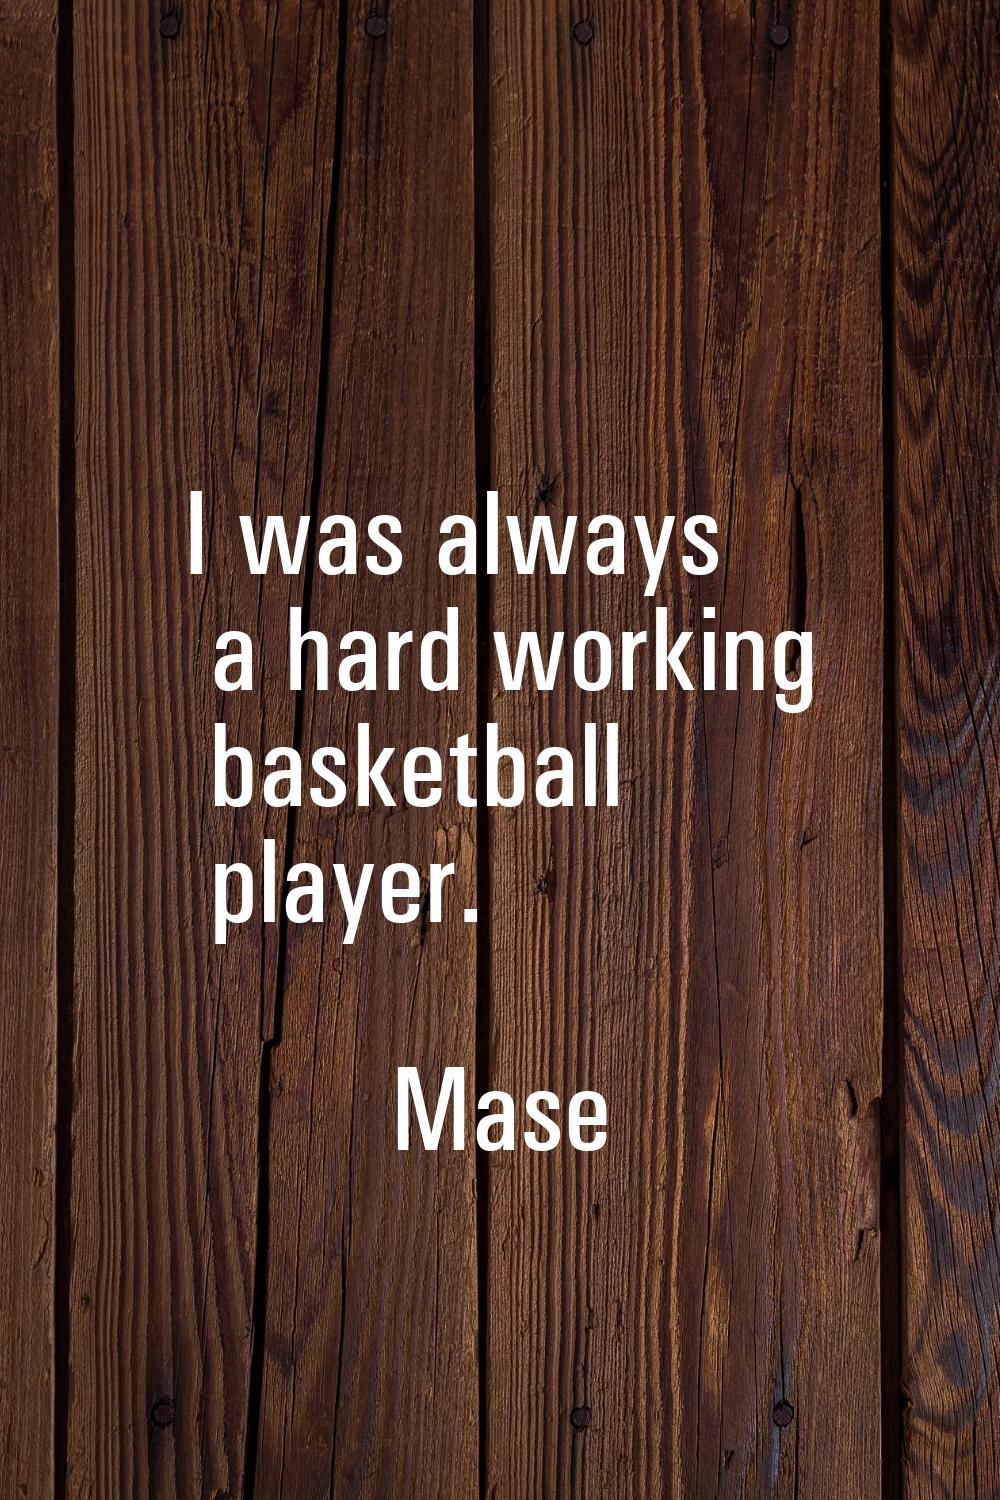 I was always a hard working basketball player.